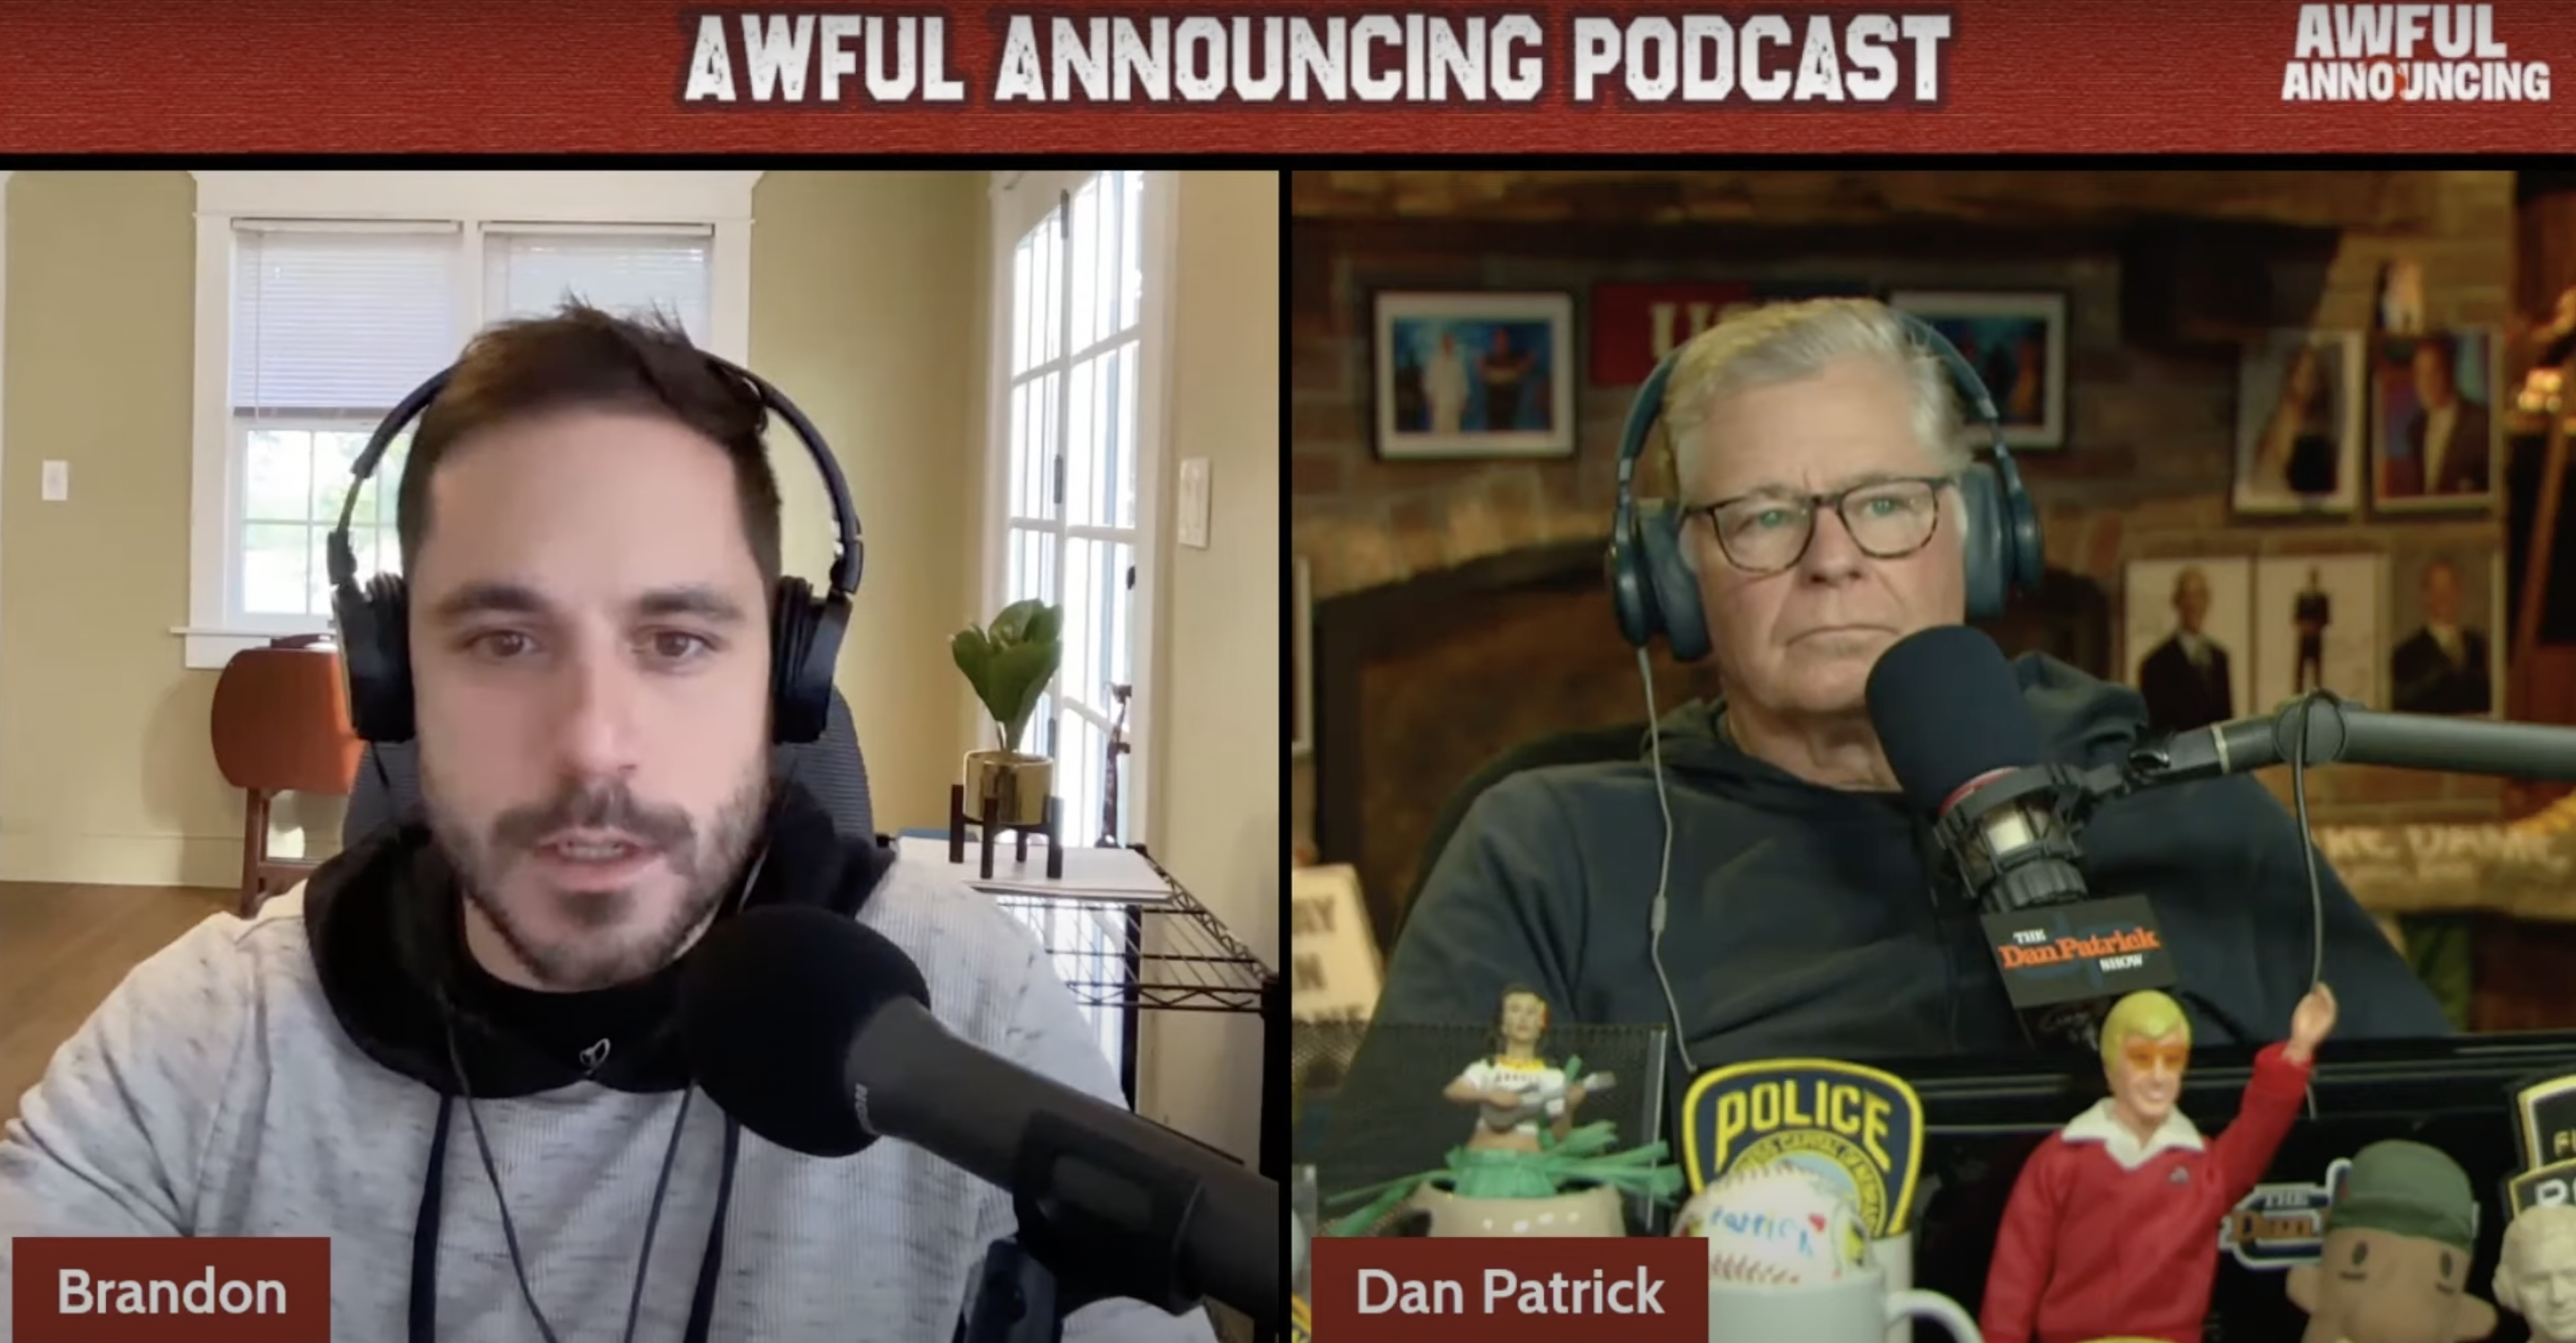 Dan Patrick on the Awful Announcing Podcast